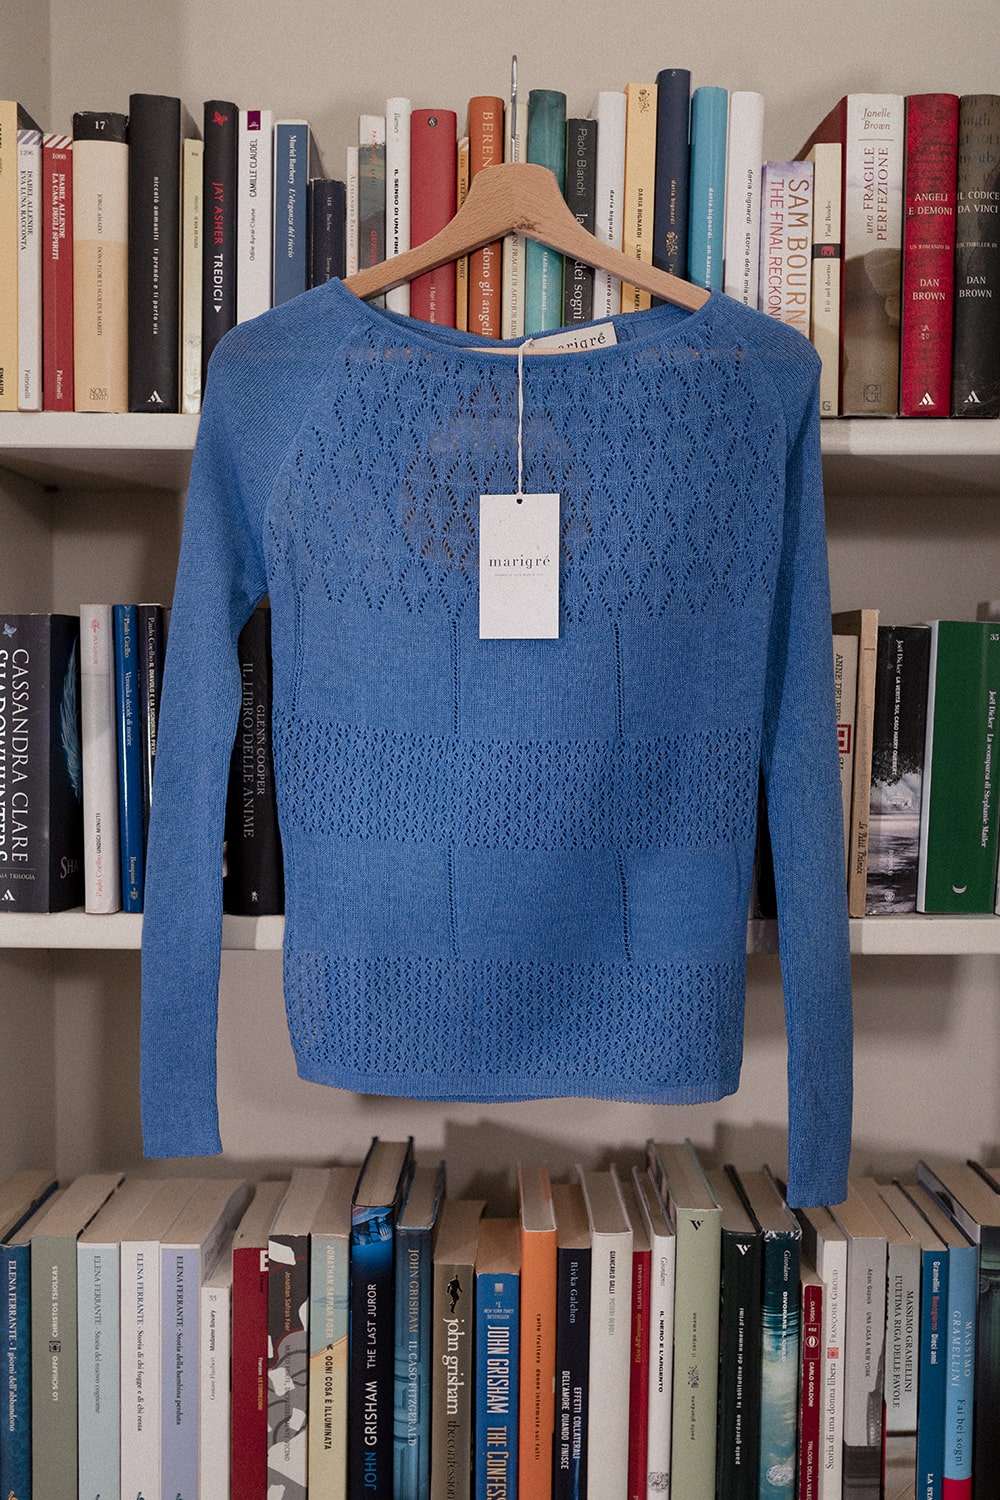 Marigré: knitwear and home decor made in Turin